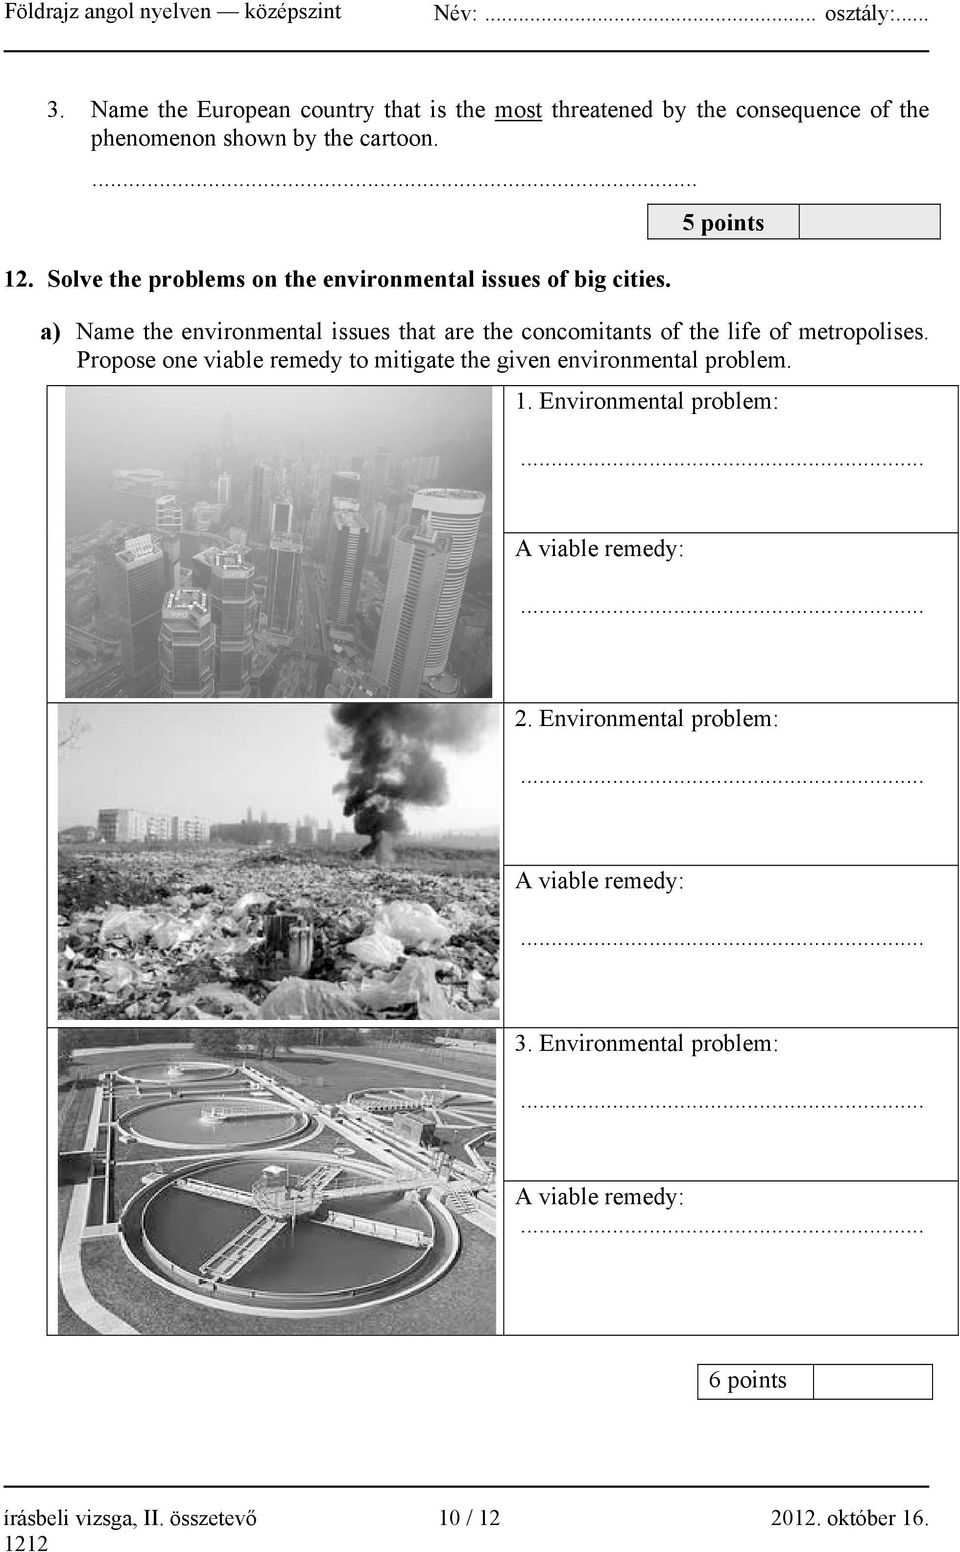 5 points a) Name the environmental issues that are the concomitants of the life of metropolises.